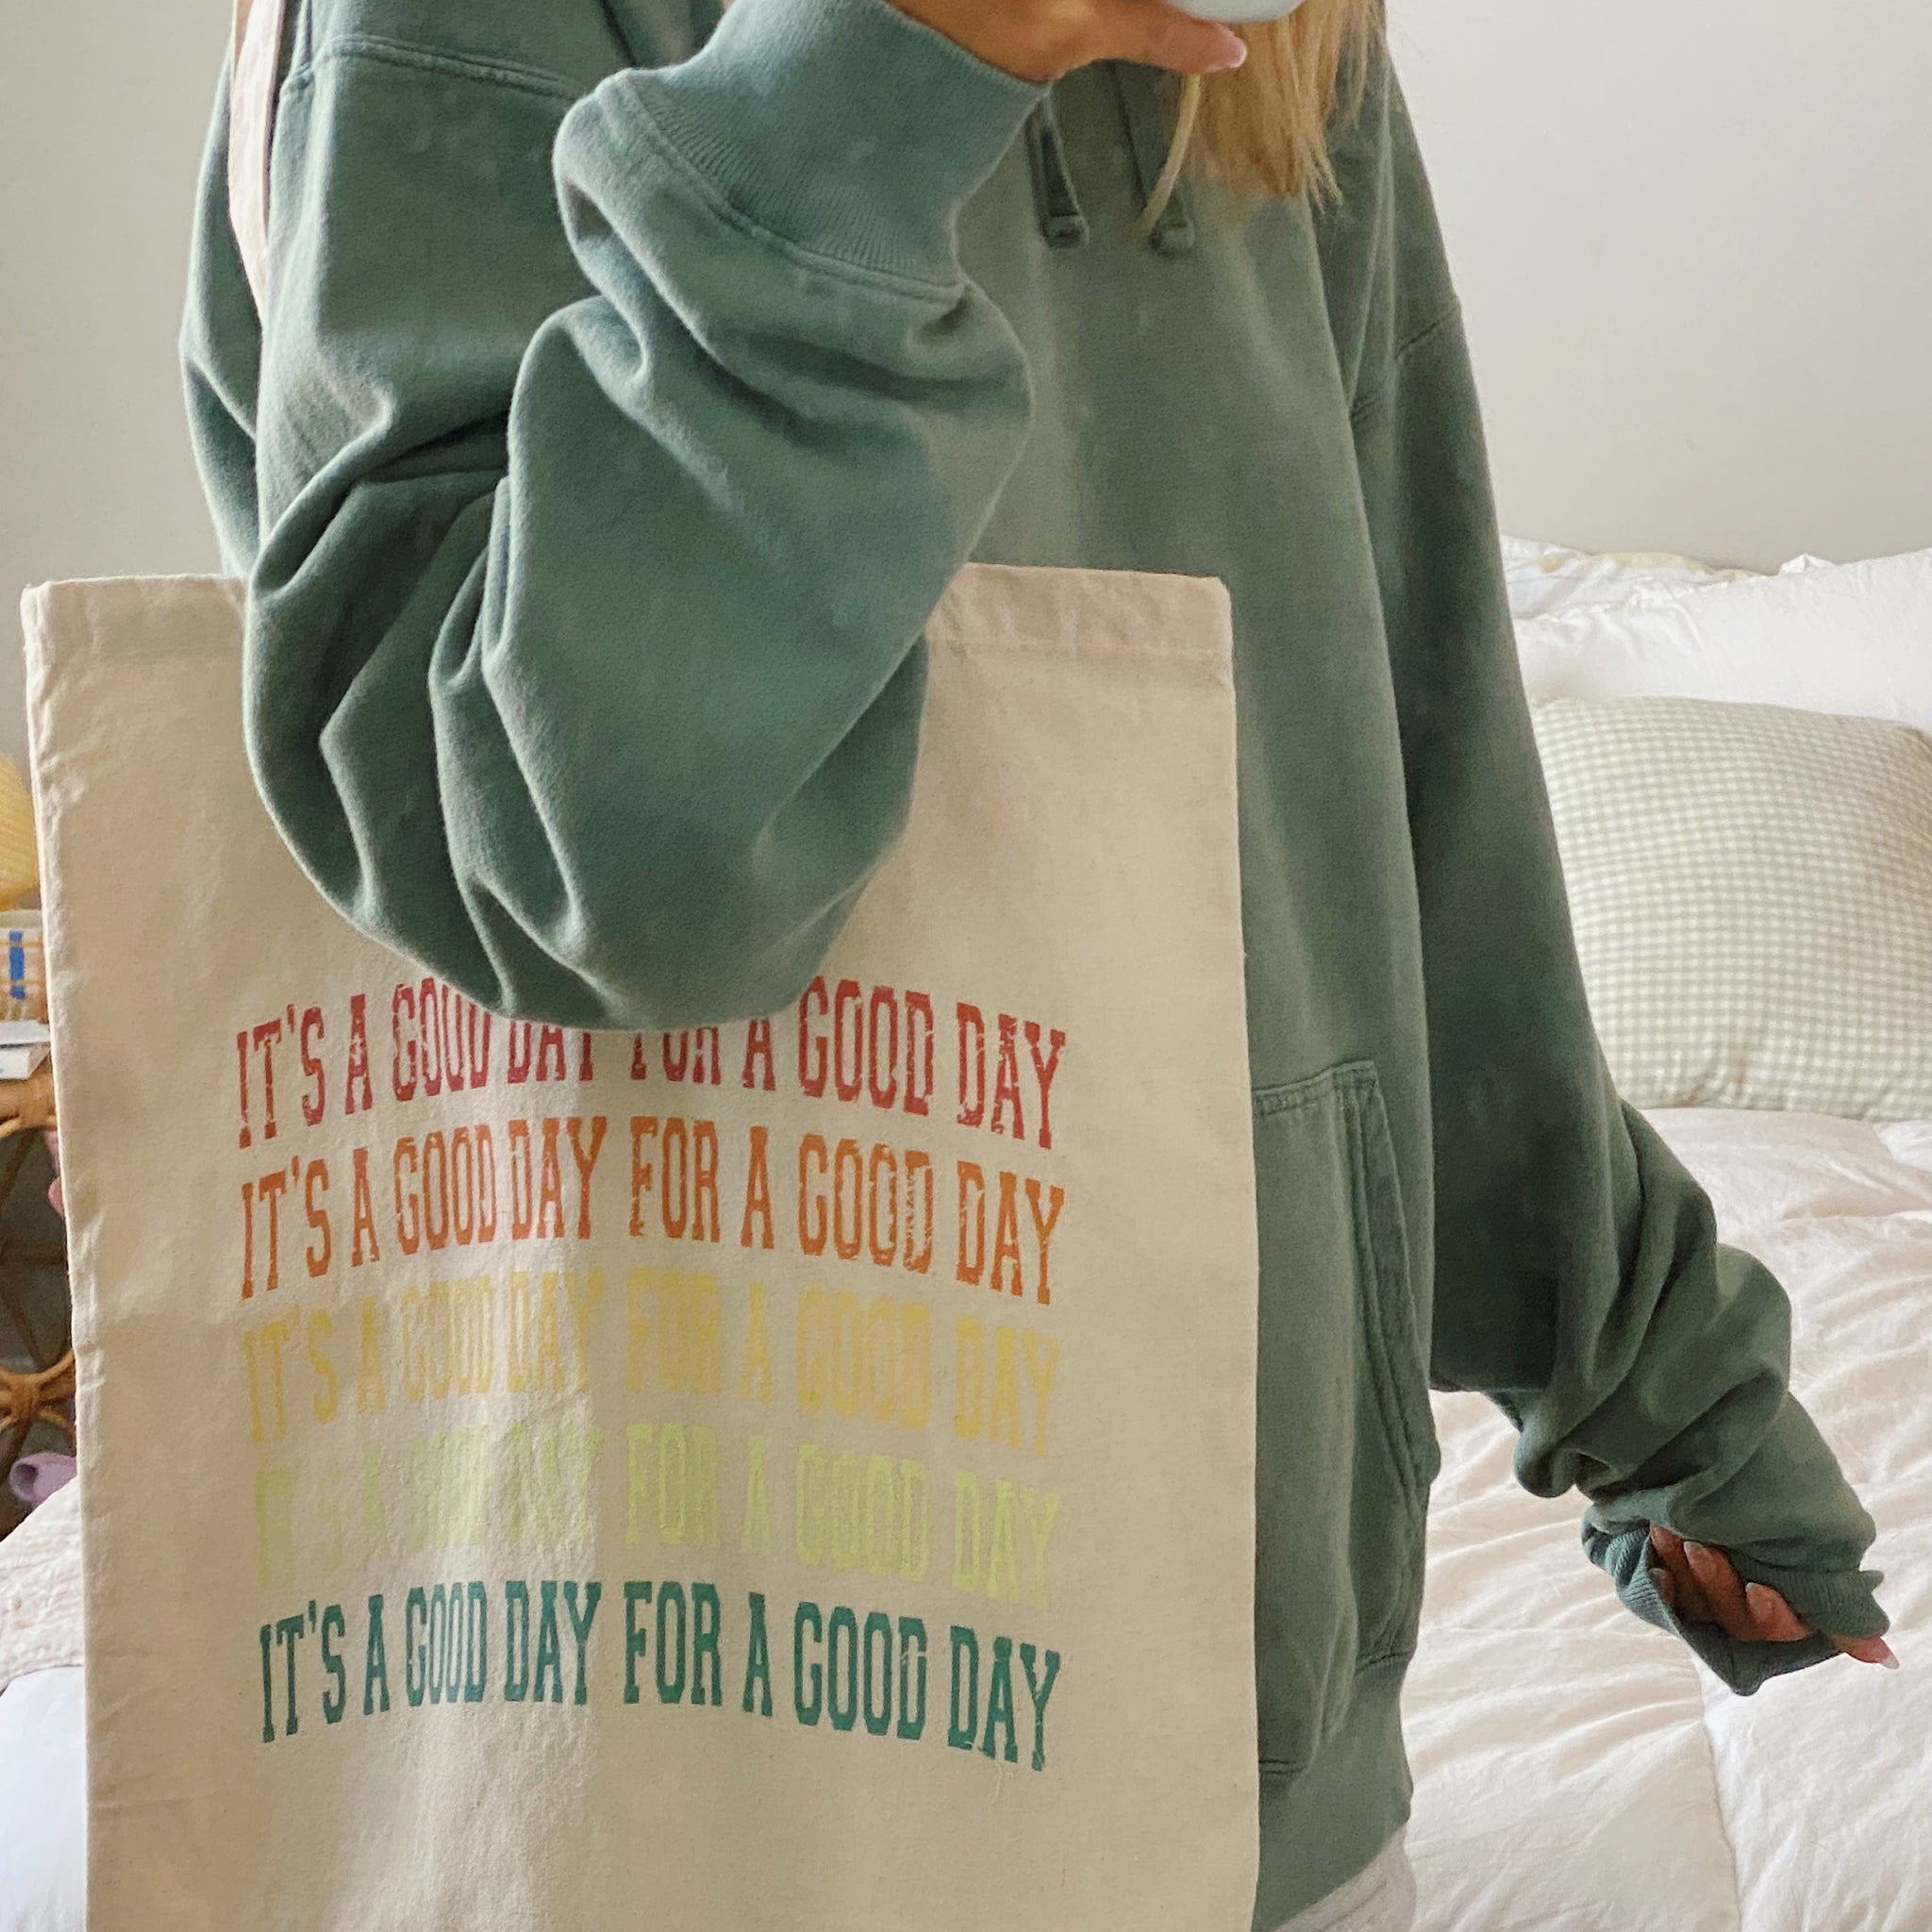 "ITS A GOOD DAY FOR A GOOD DAY" TOTE